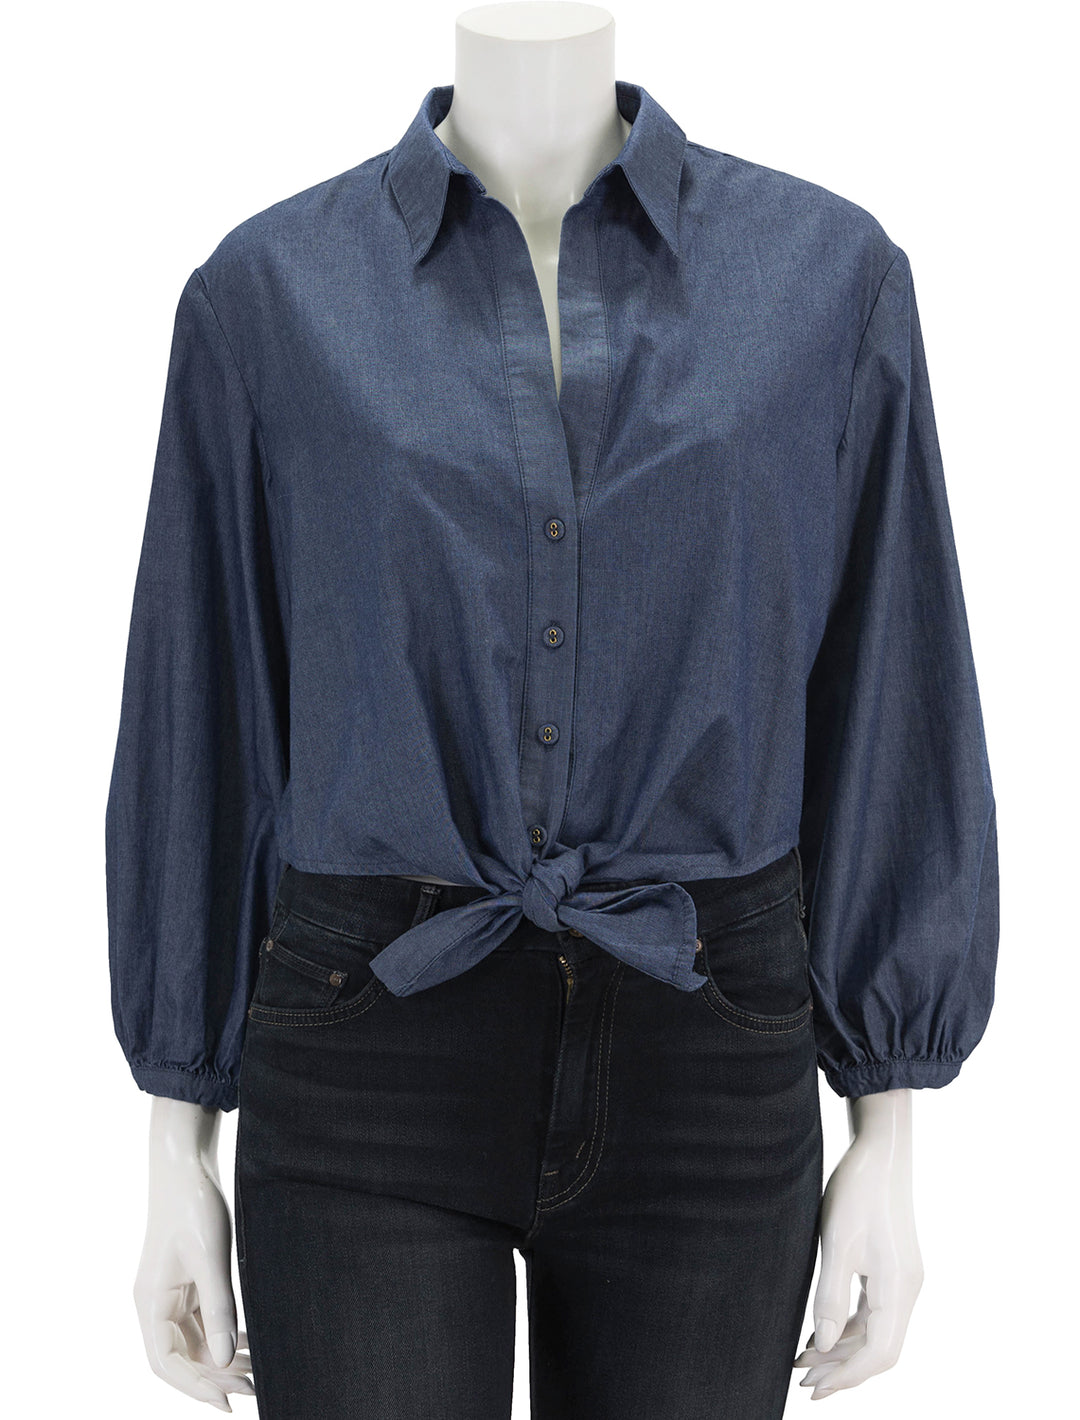 Front view of Cara Cara's rumson top in chambray.